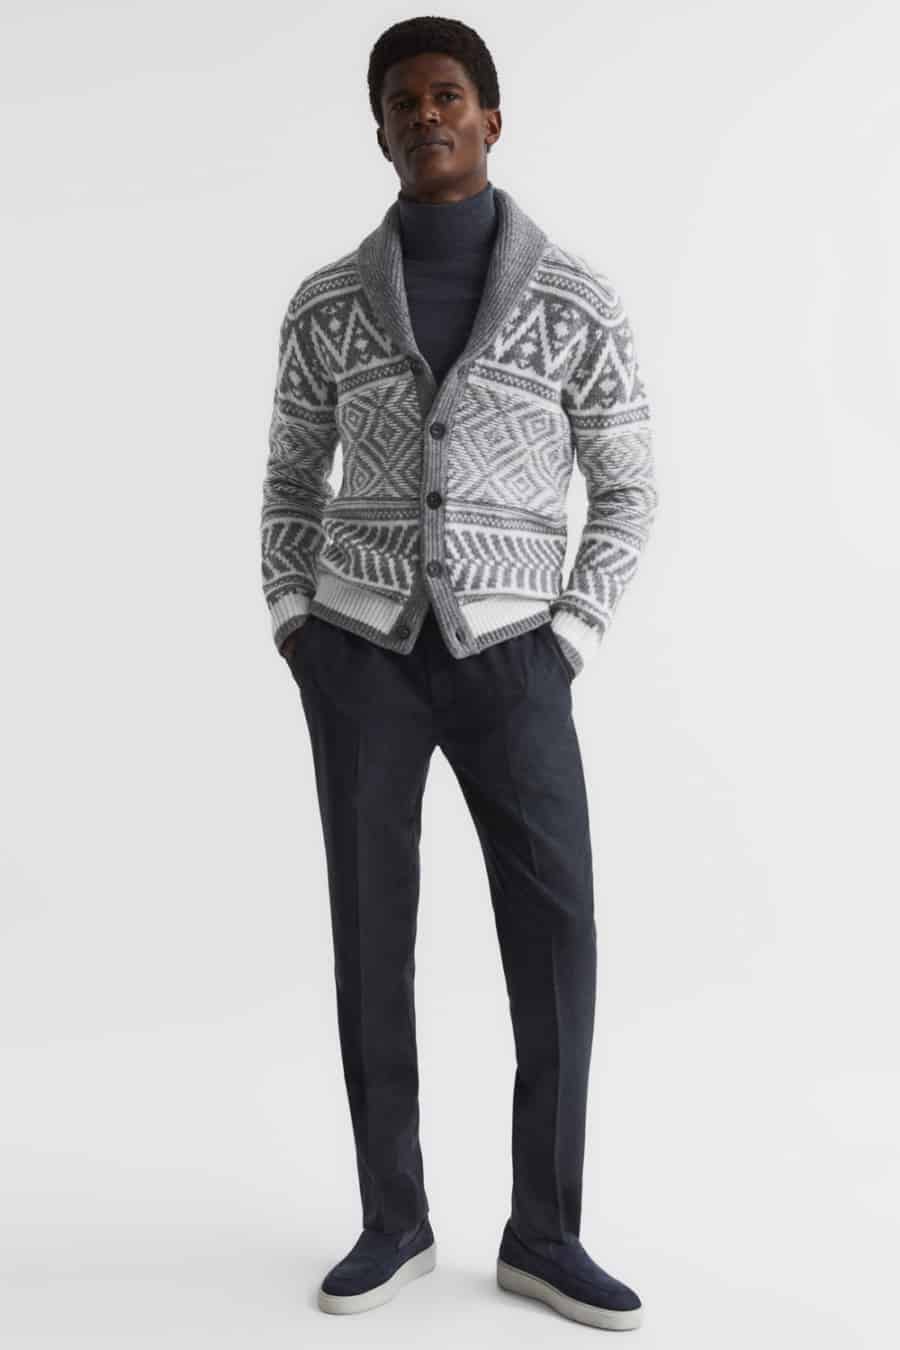 Men's charcoal trousers, charcoal turtleneck, grey fair isle cardigan and suede loafers outfit